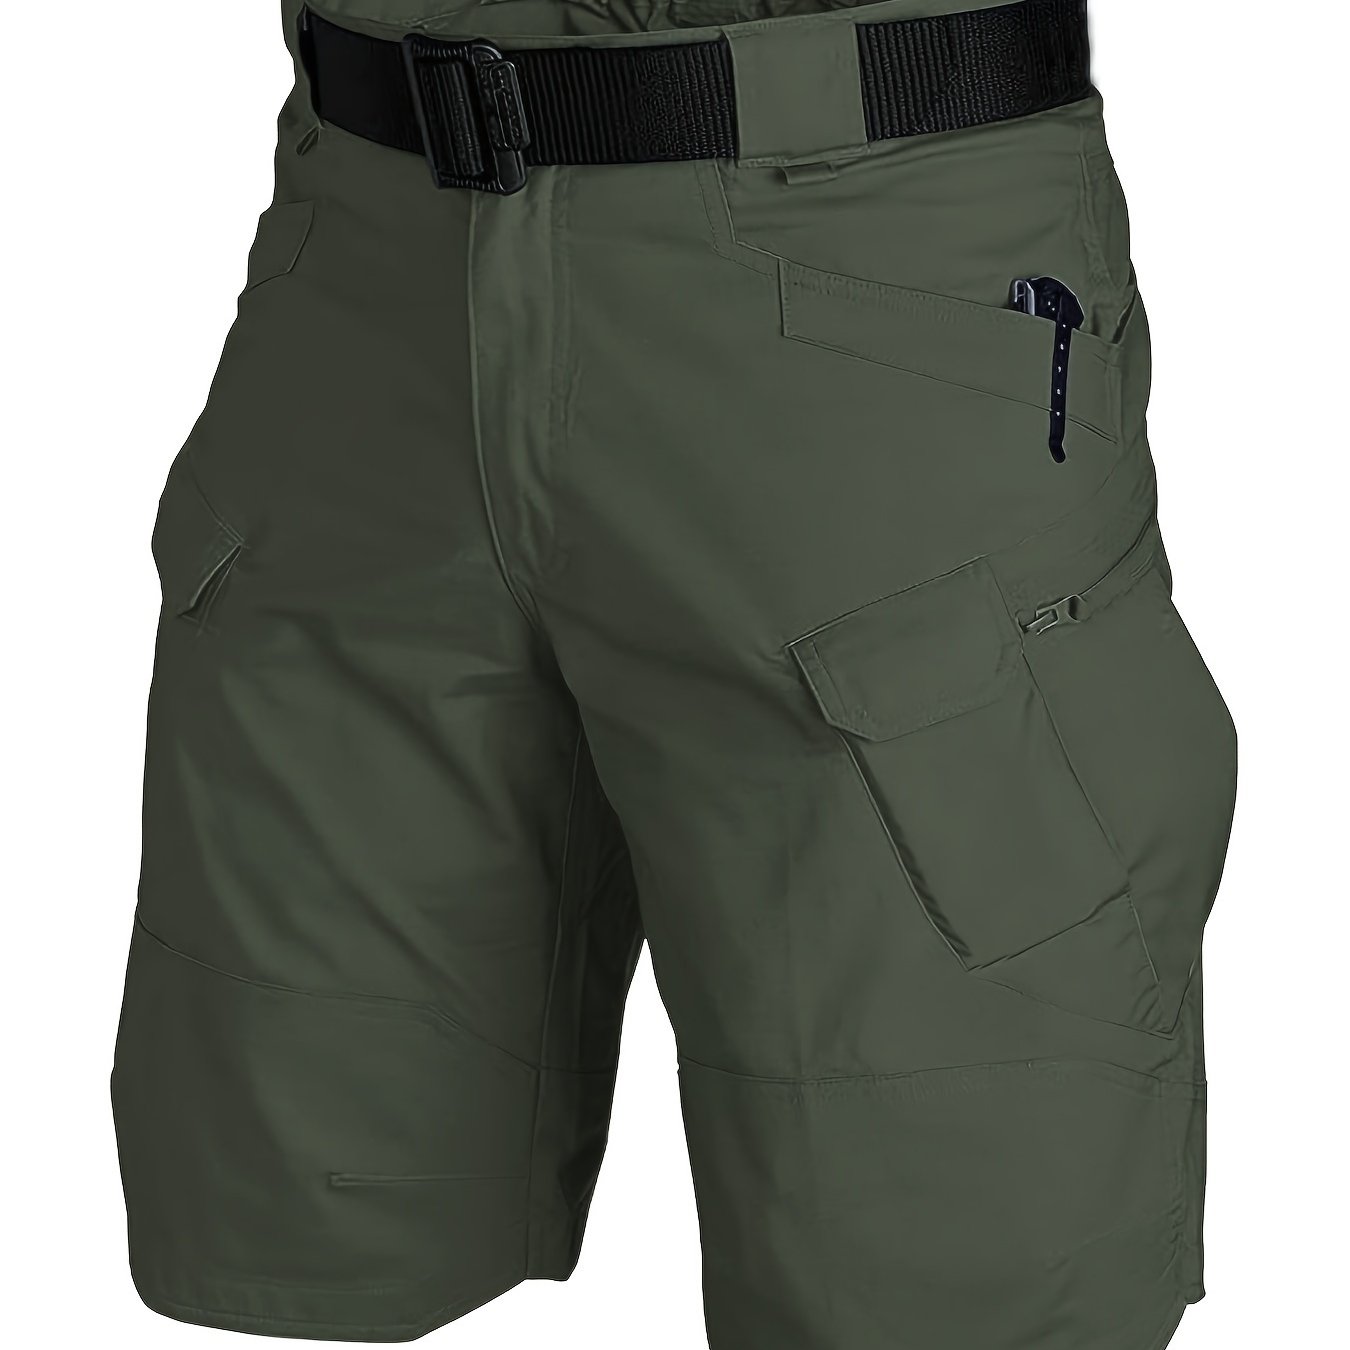 mens casual tactical shorts multi pocket shorts for outdoor activities